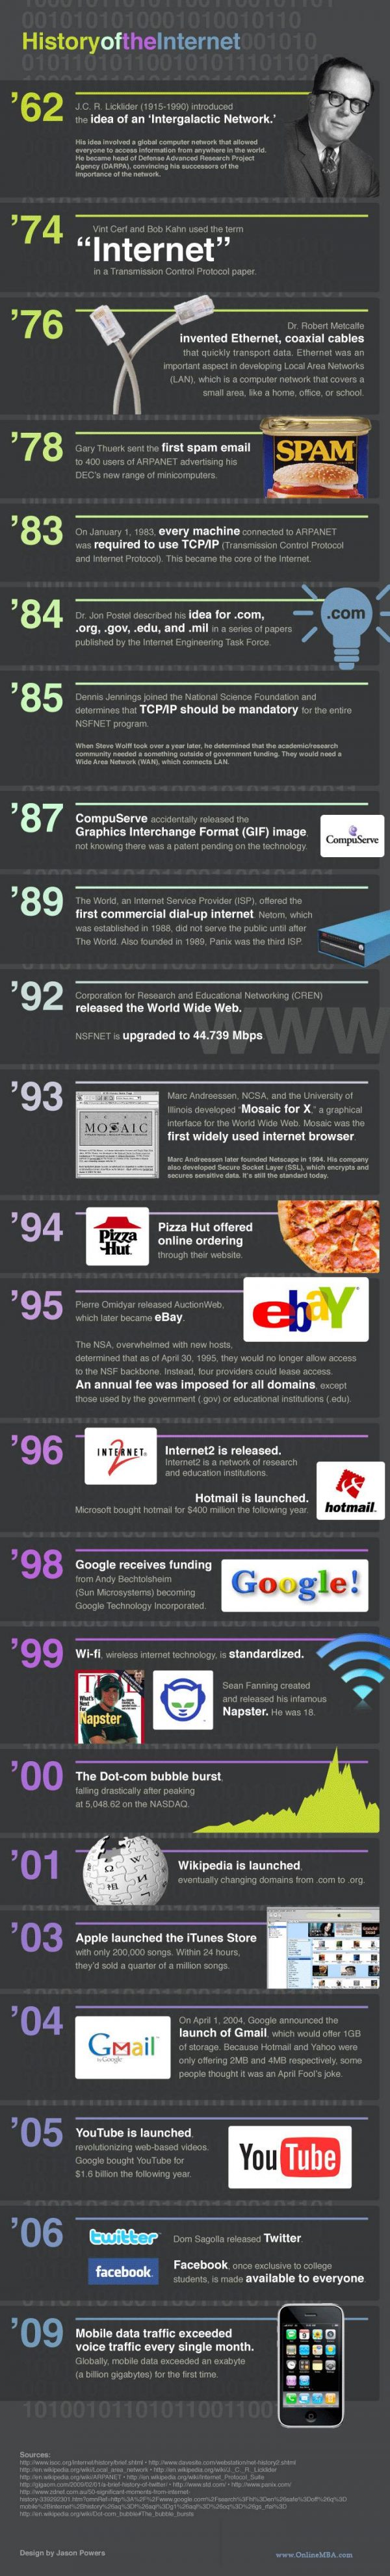 History of the Internet (Infographic)